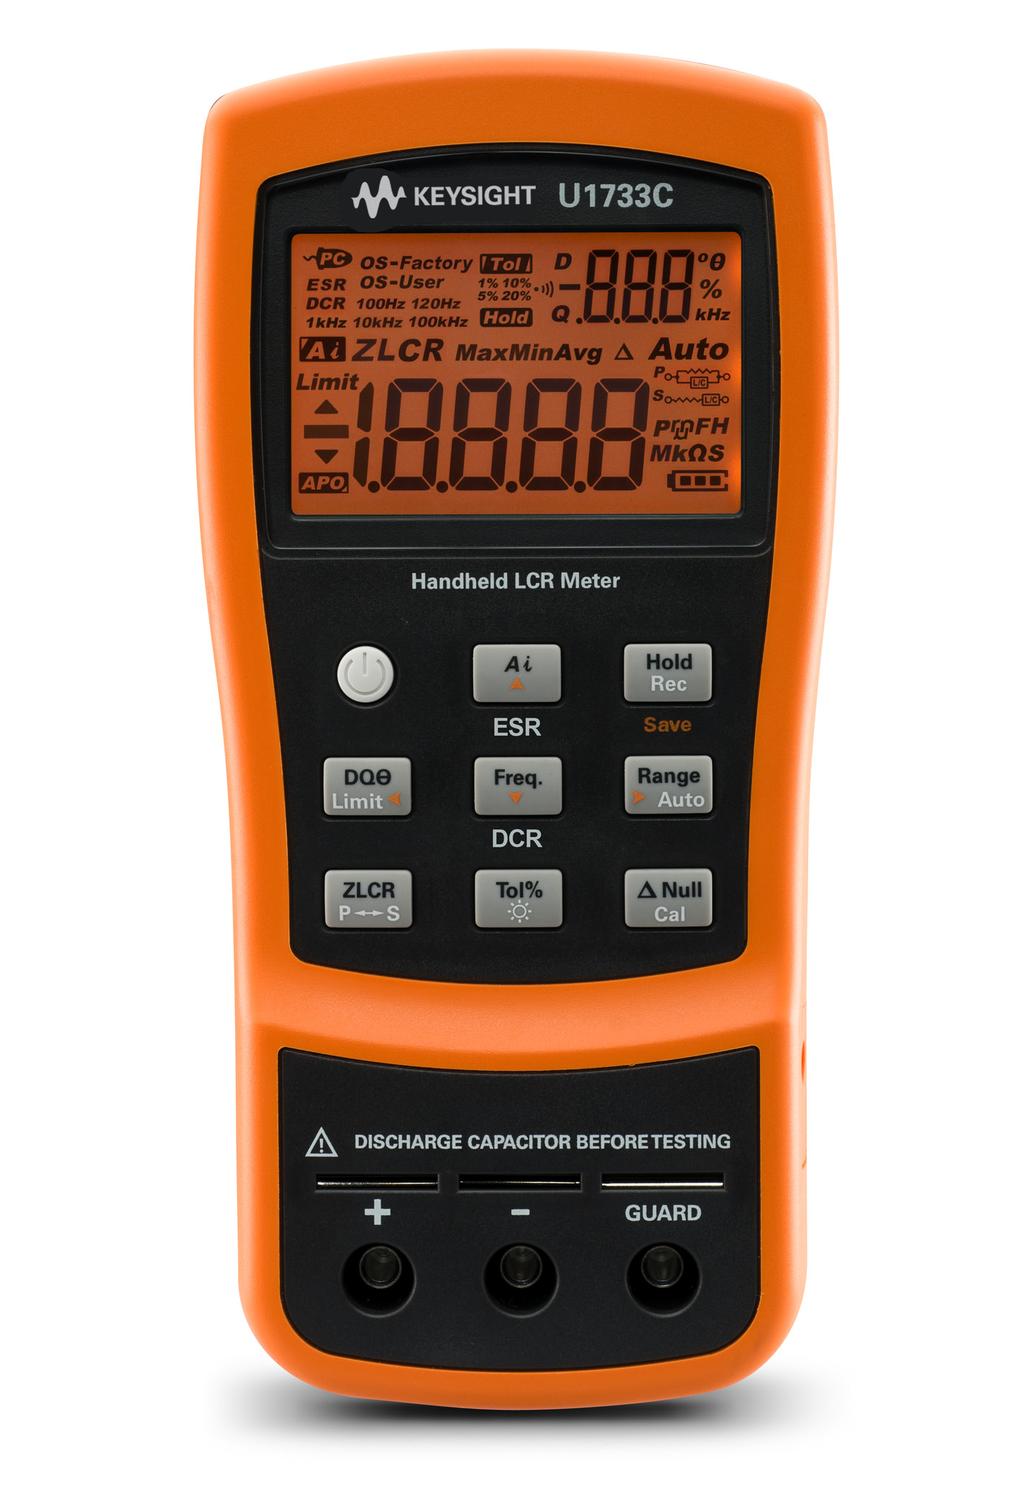 04 Keysight U1730C Series Handheld LCR Meters Data Sheet Take a Closer Look Visible and audible tolerance mode for component sorting Maximum, Minimum and Average values recording Ai helps identify L,